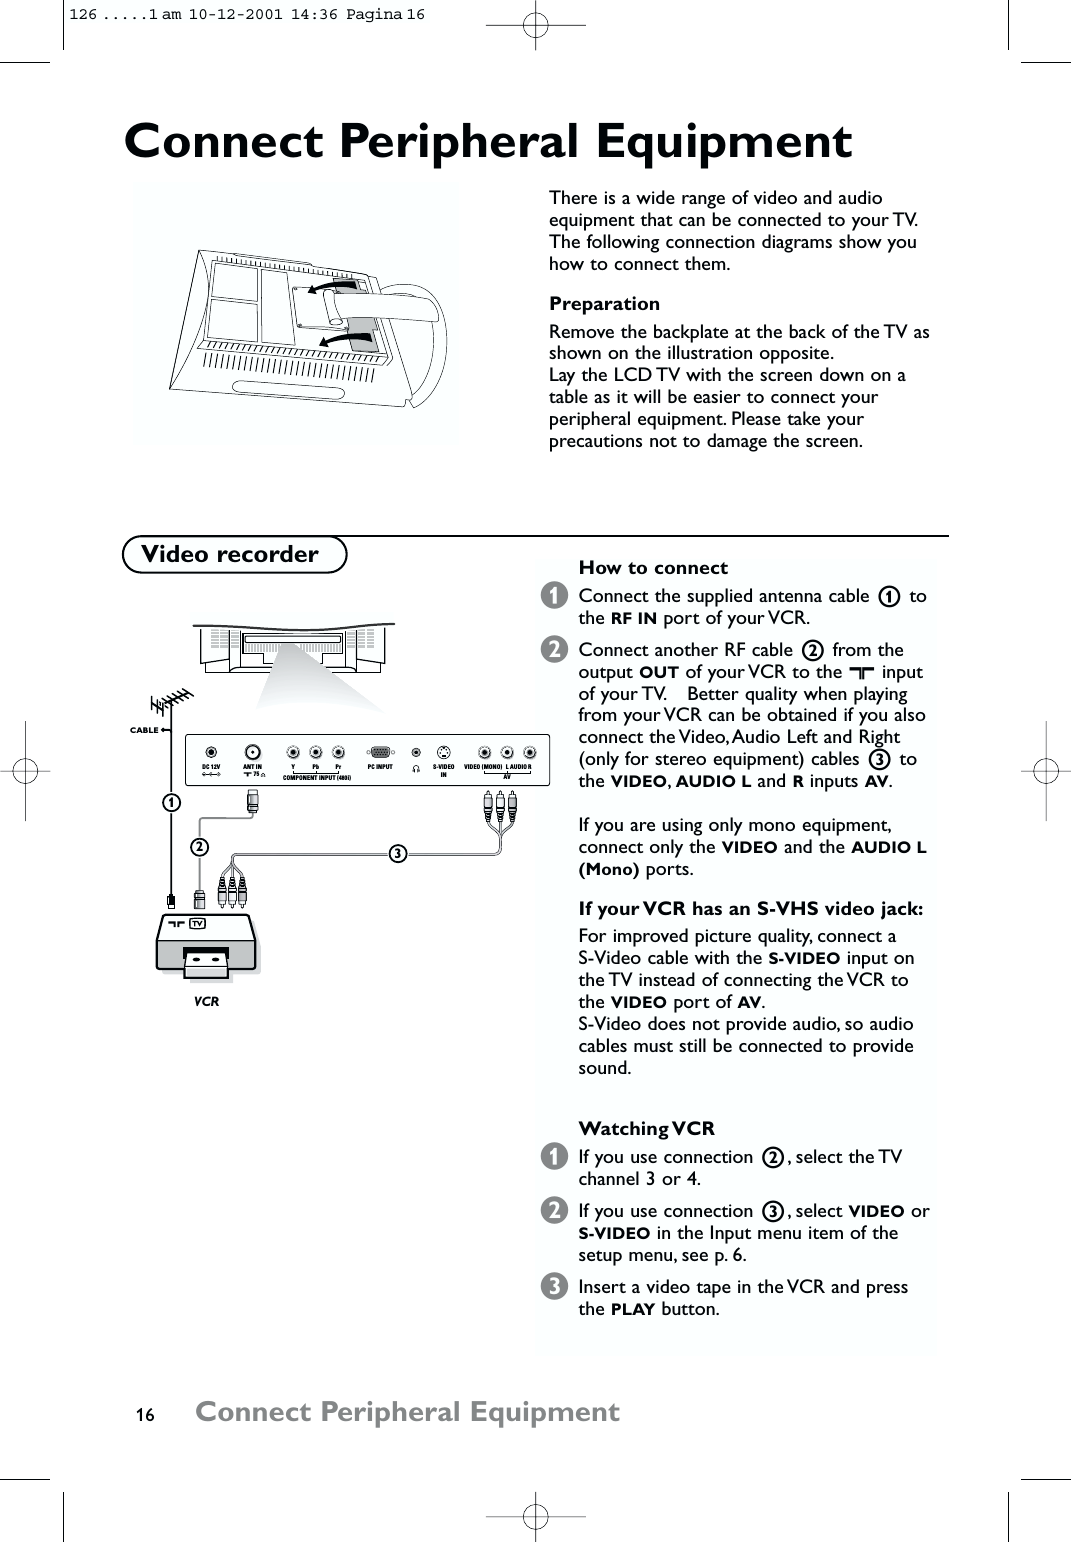 16 Connect Peripheral EquipmentConnect Peripheral EquipmentThere is a wide range of video and audioequipment that can be connected to your TV.The following connection diagrams show youhow to connect them.PreparationRemove the backplate at the back of the TV asshown on the illustration opposite.Lay the LCD TV with the screen down on atable as it will be easier to connect yourperipheral equipment. Please take yourprecautions not to damage the screen.How to connect&amp;Connect the supplied antenna cable 1tothe RF IN port of your VCR.éConnect another RF cable 2from theoutput OUT of your VCR to the xinputof your TV. Better quality when playingfrom your VCR can be obtained if you alsoconnect the Video,Audio Left and Right(only for stereo equipment) cables 3tothe VIDEO,AUDIO L and Rinputs AV.If you are using only mono equipment,connect only the VIDEO and the AUDIO L(Mono) ports.If your VCR has an S-VHS video jack:For improved picture quality, connect a S-Video cable with the S-VIDEO input onthe TV instead of connecting the VCR tothe VIDEO port of AV.S-Video does not provide audio, so audiocables must still be connected to providesound.Watching VCR&amp;If you use connection 2, select the TVchannel 3 or 4.éIf you use connection 3, select VIDEO orS-VIDEO in the Input menu item of thesetup menu, see p. 6.“Insert a video tape in the VCR and pressthe PLAY button.Video recorderS-VIDEOINVIDEO (MONO) LAVRAUDIOVCR CABLE23x 75 DC 12V ANT IN PC INPUTYPbCOMPONENT INPUT (480i)Pr1126 .....1 am  10-12-2001  14:36  Pagina 16